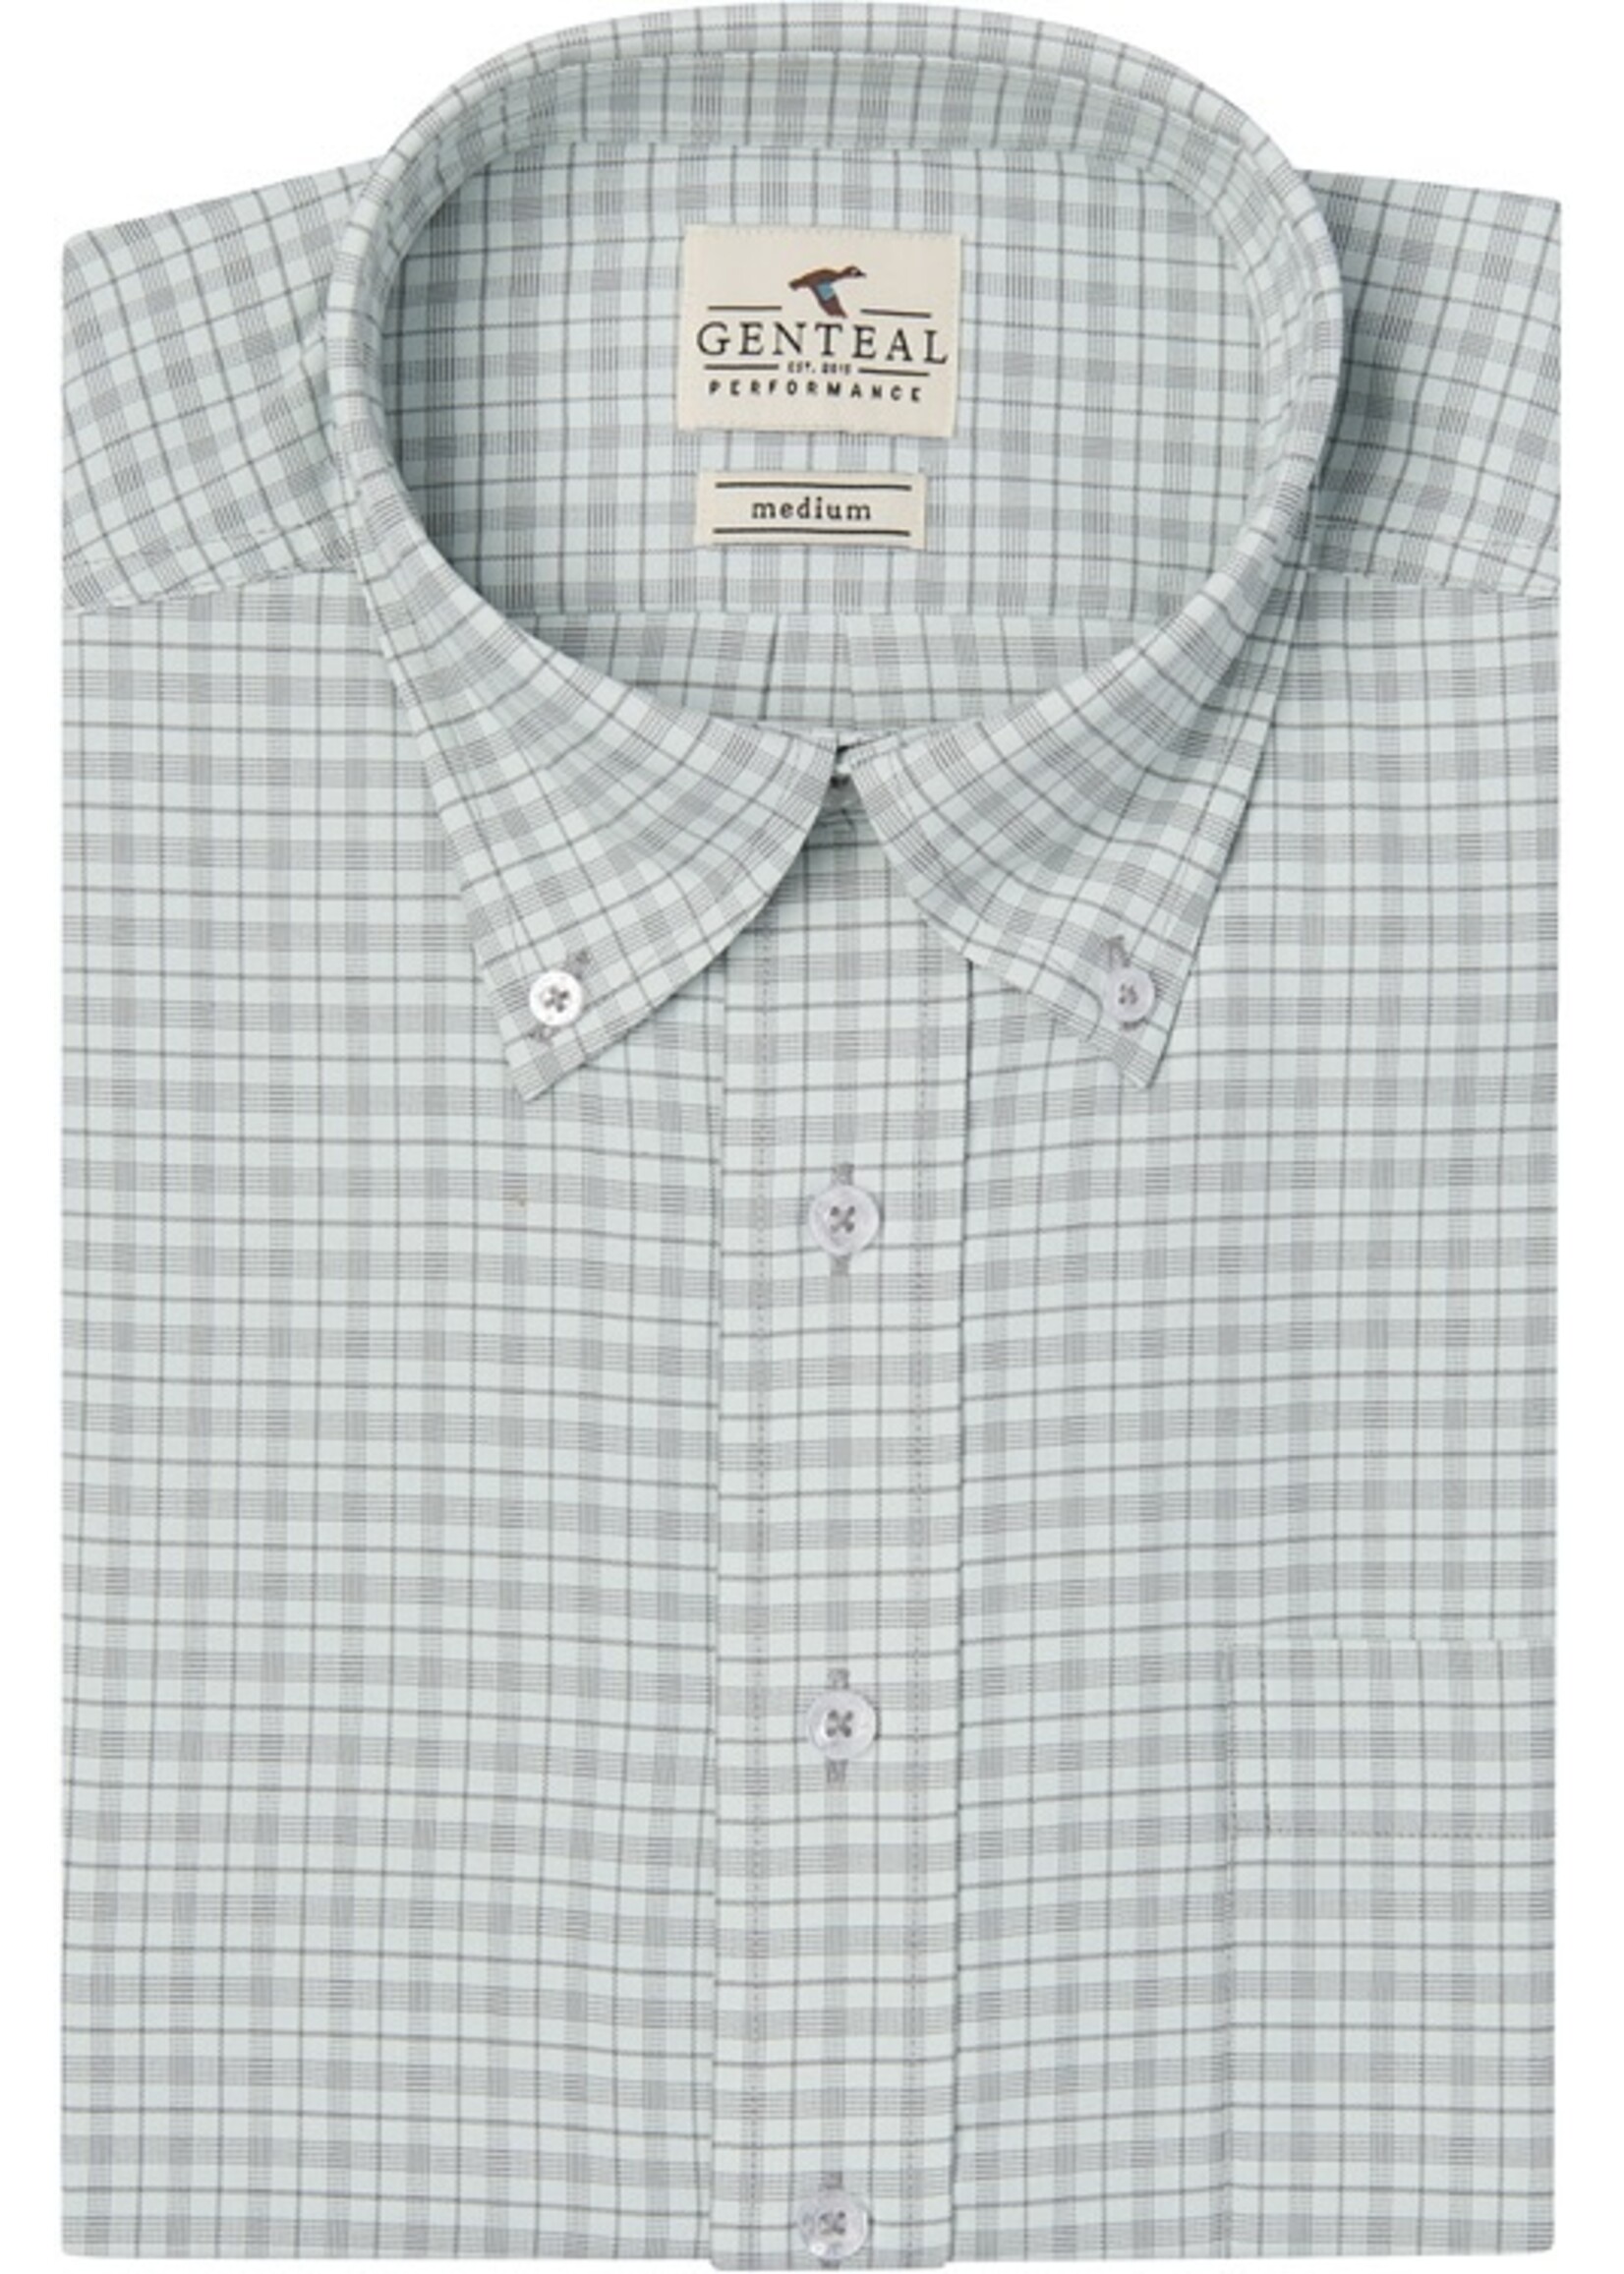 GenTeal Apparel Heirloom Plaid Softouch Performance Woven